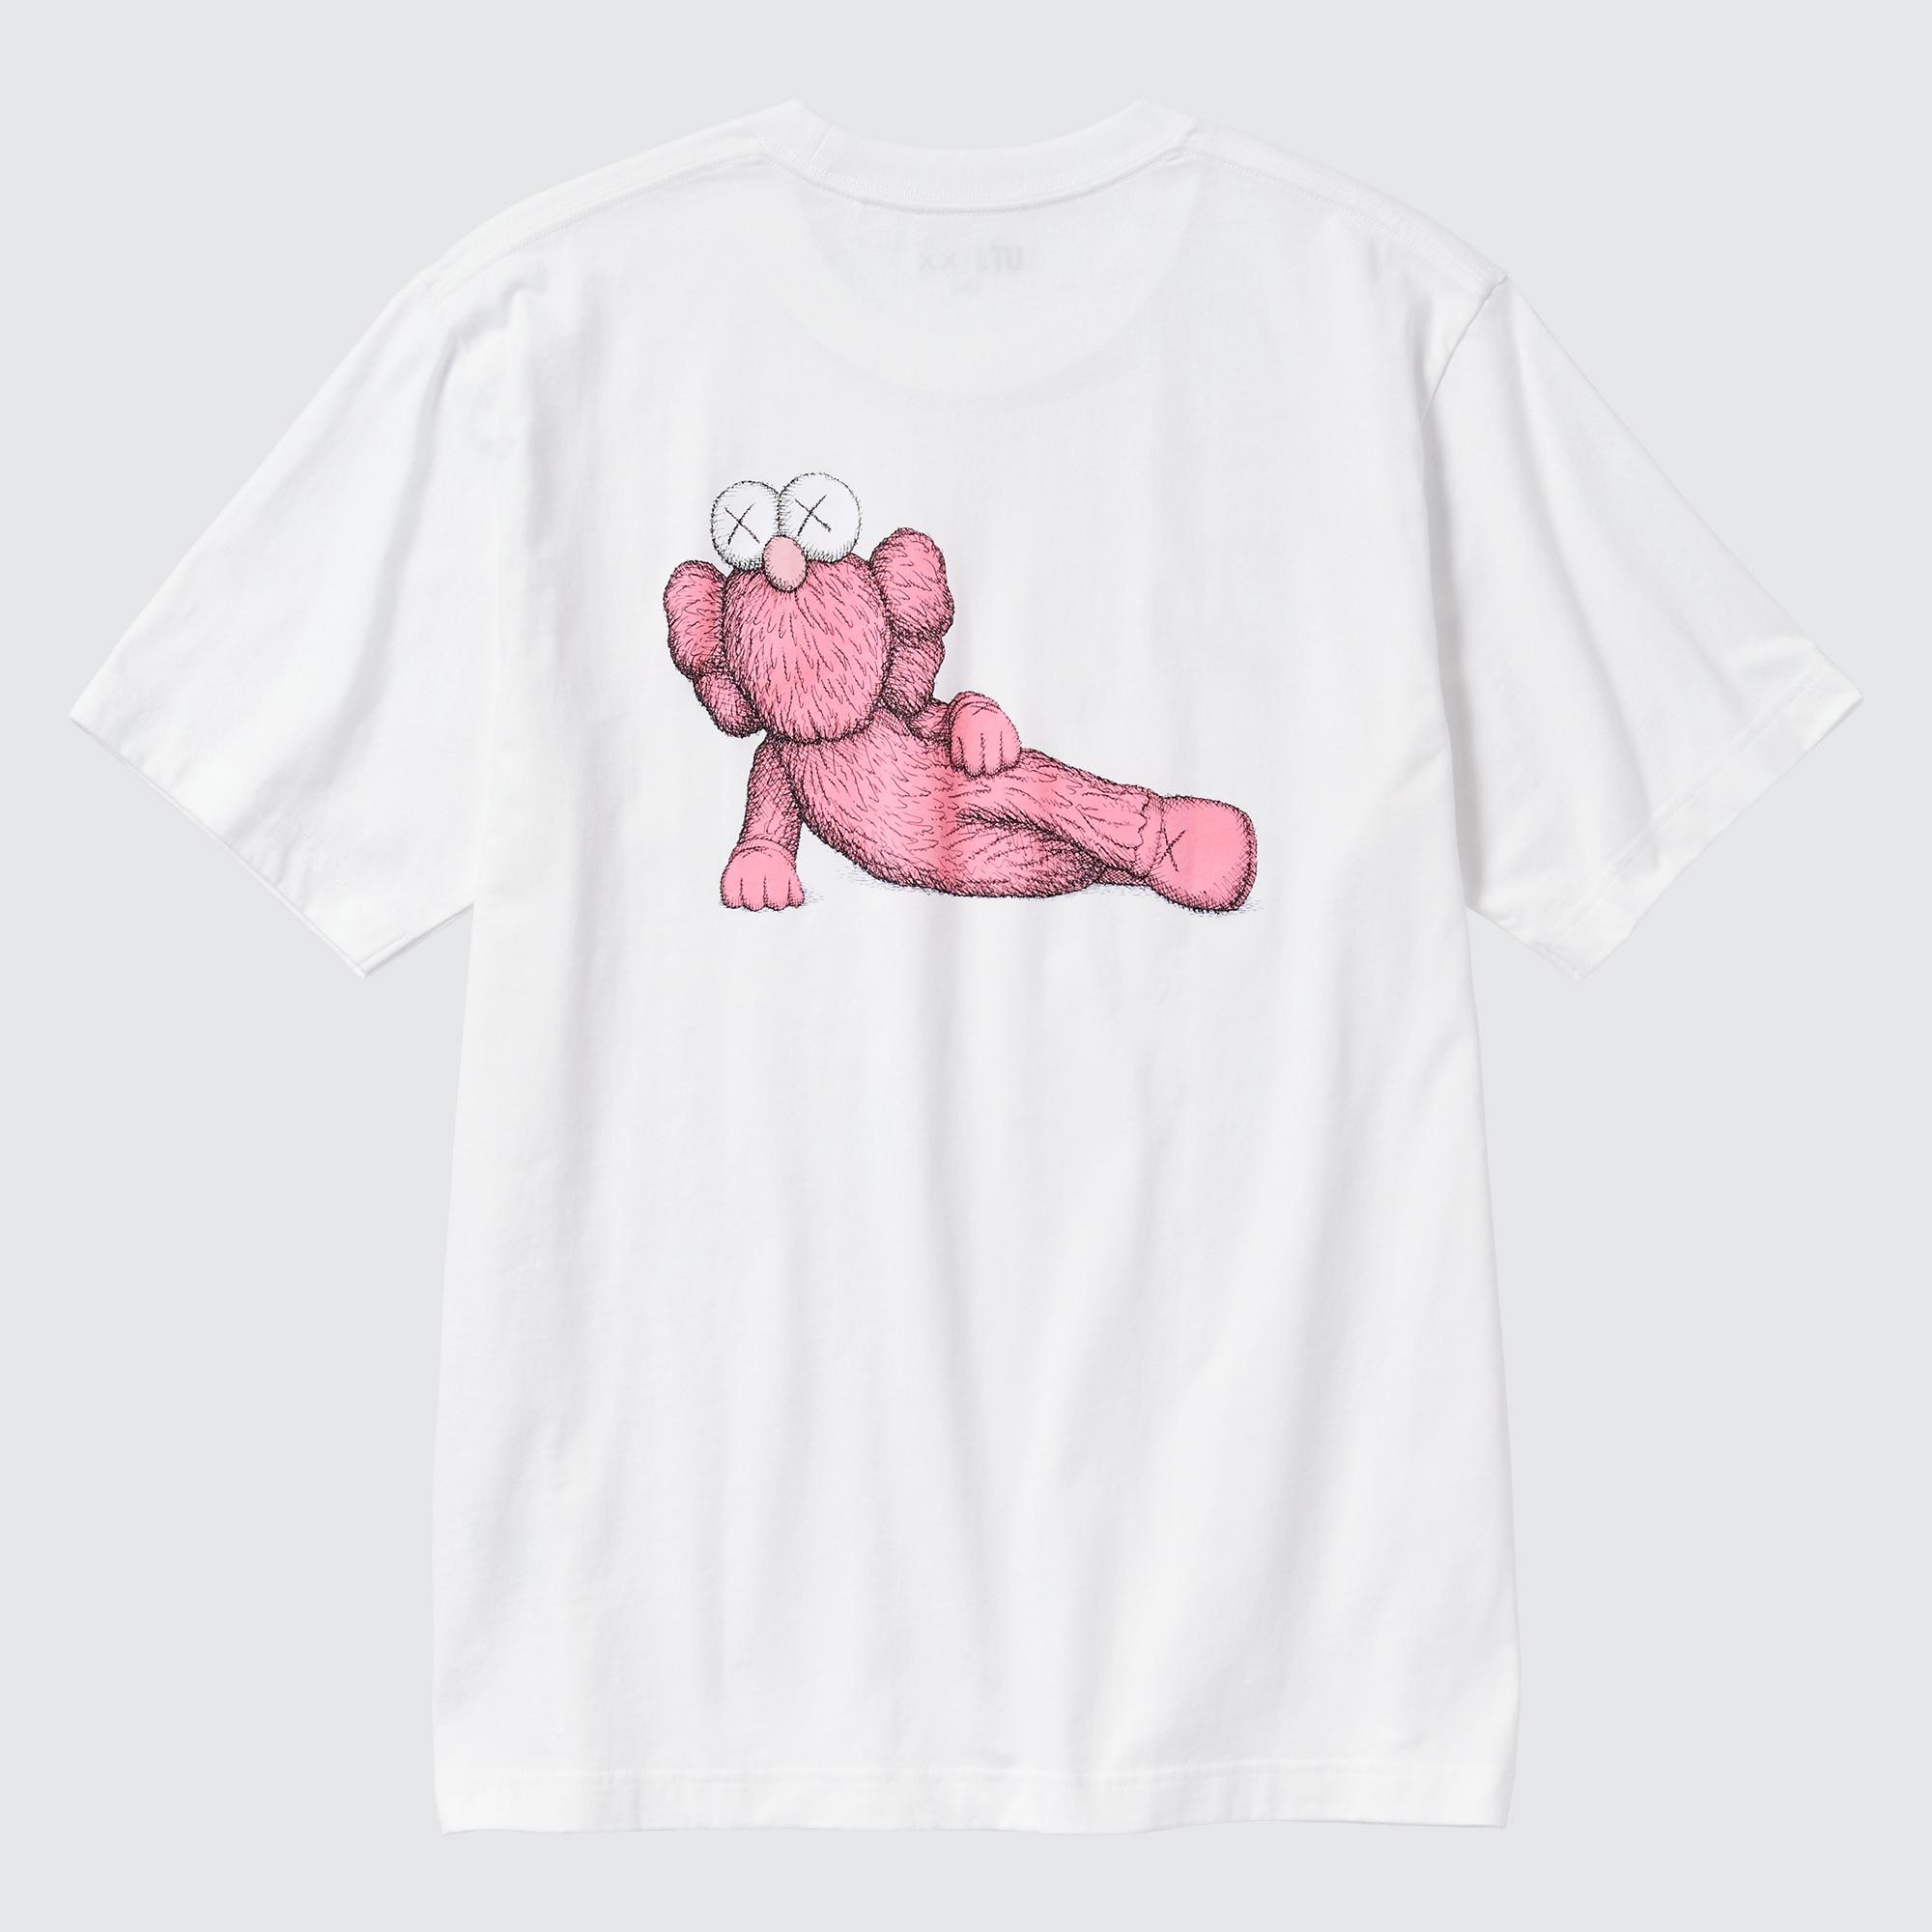 KAWS 'The Promise:' New collection figures available online